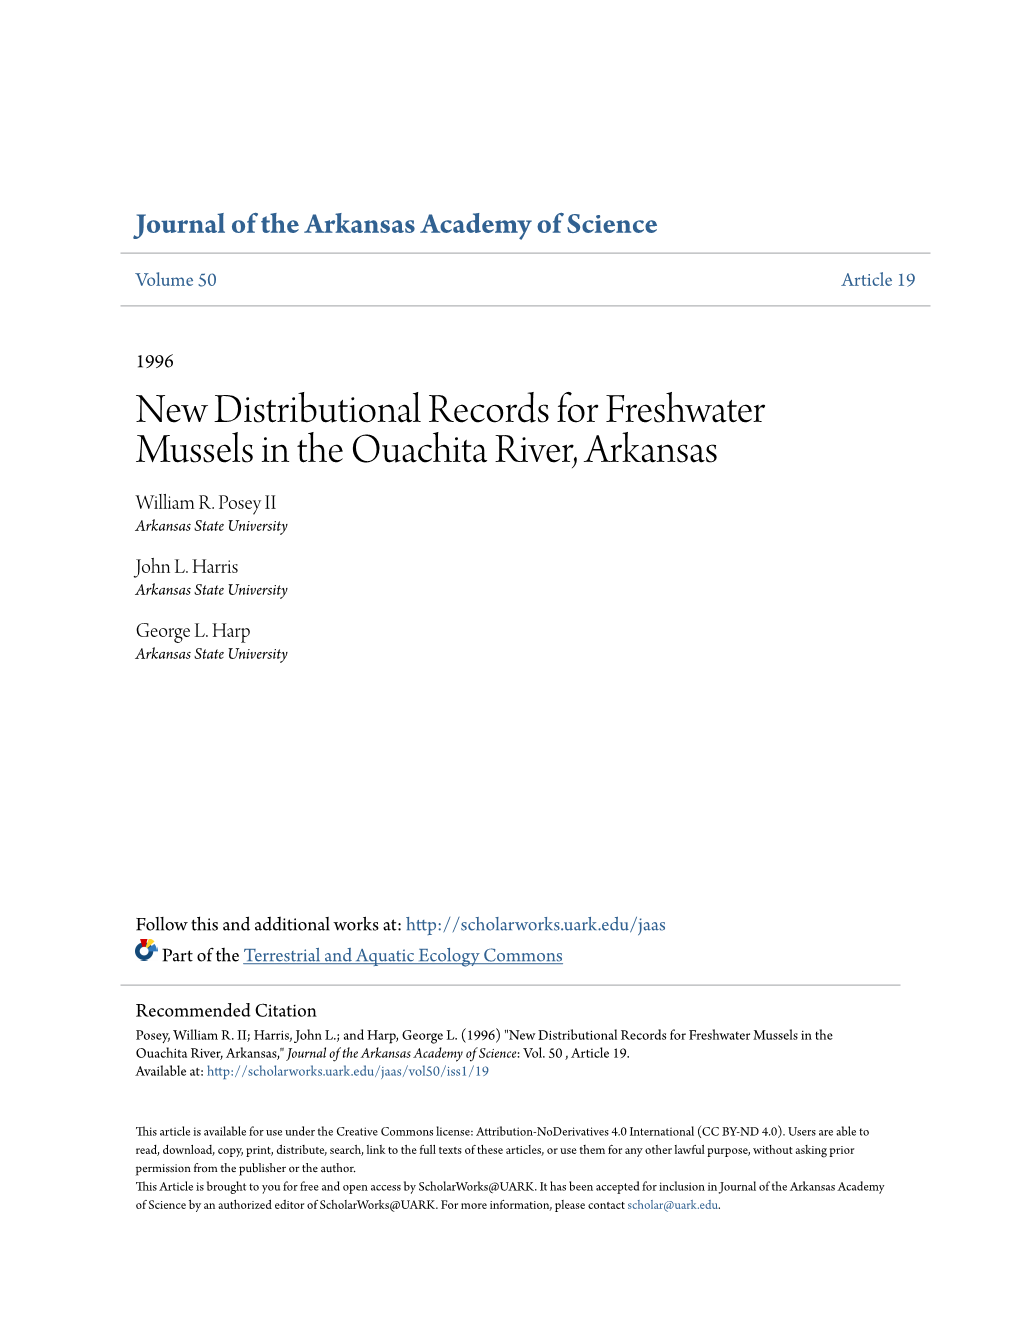 New Distributional Records for Freshwater Mussels in the Ouachita River, Arkansas William R